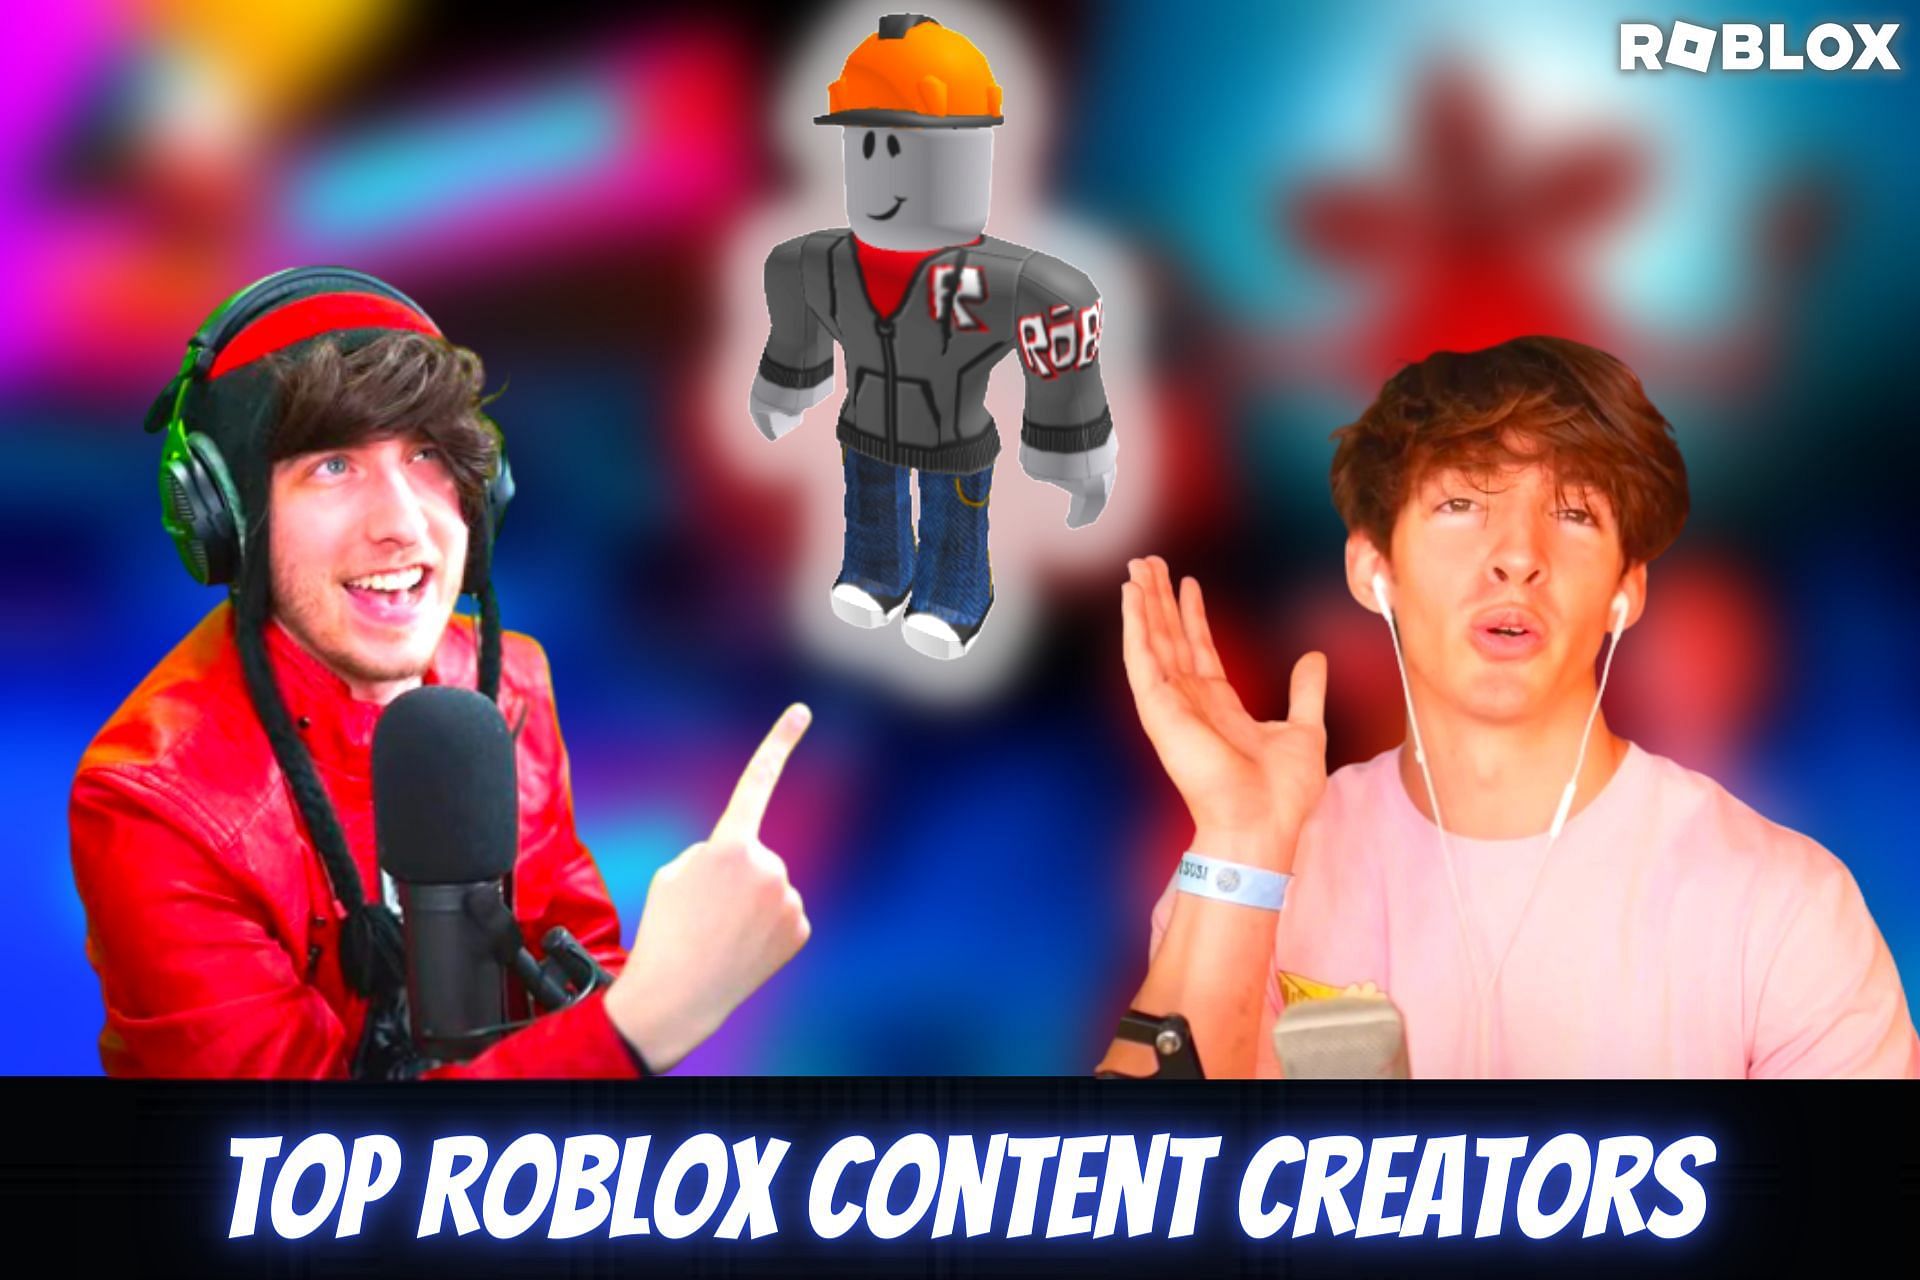 Top Roblox Leaders Who Creators and Developers Should Know